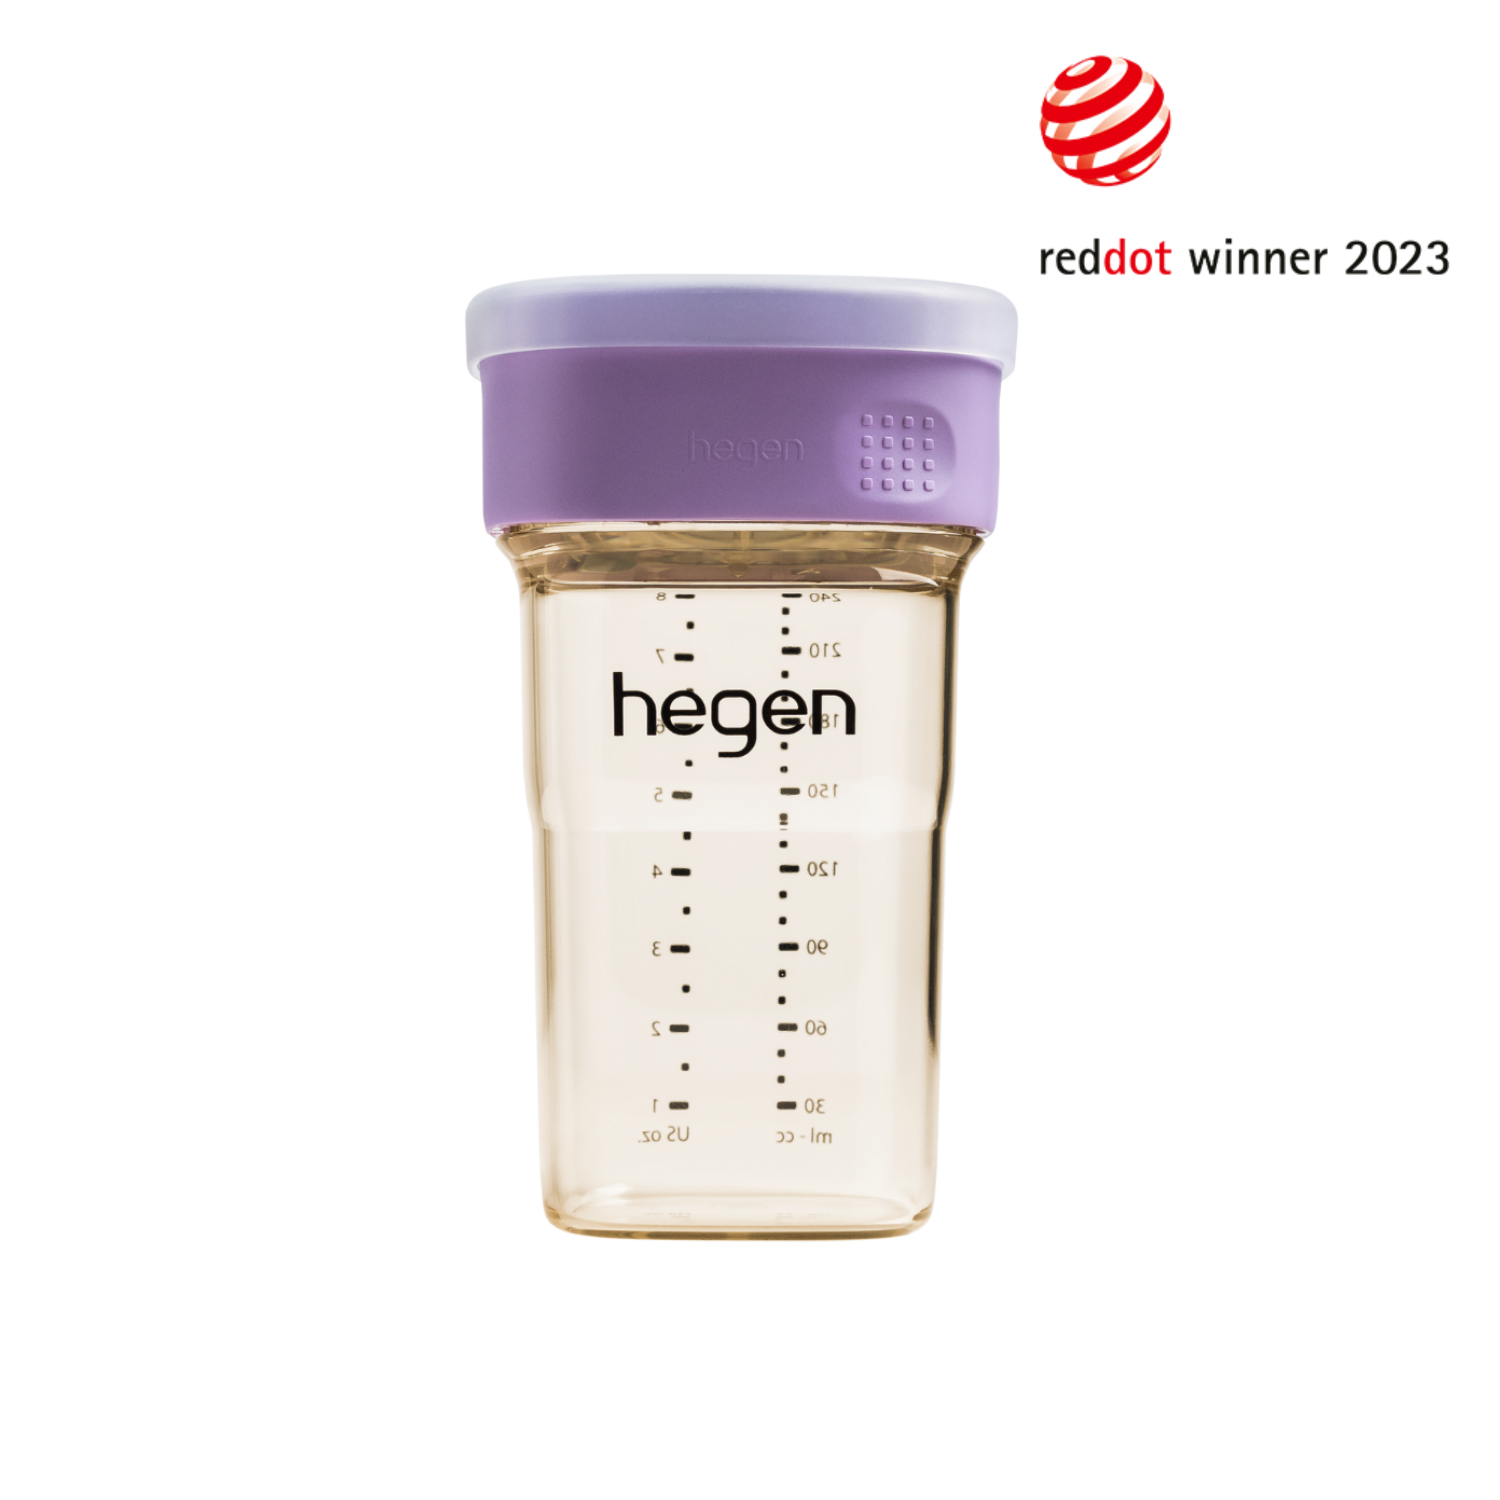 Hegen PCTO™ 240ml/8oz All-Rounder Cup PPSU Purple (12 months and above)